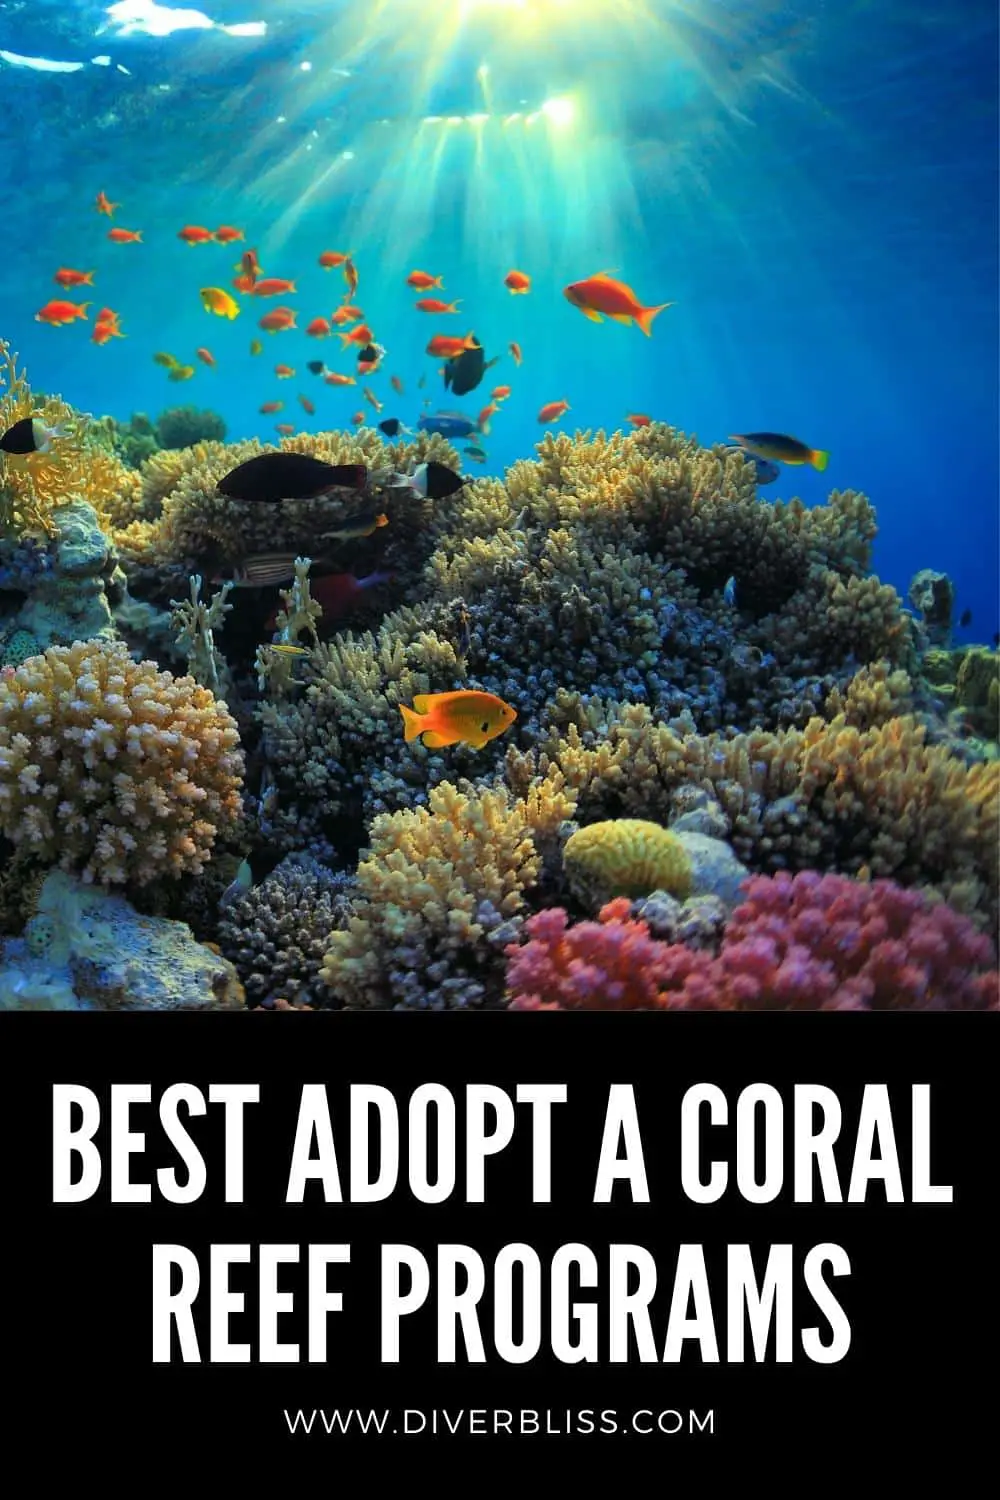 Best adopt a coral reef programs